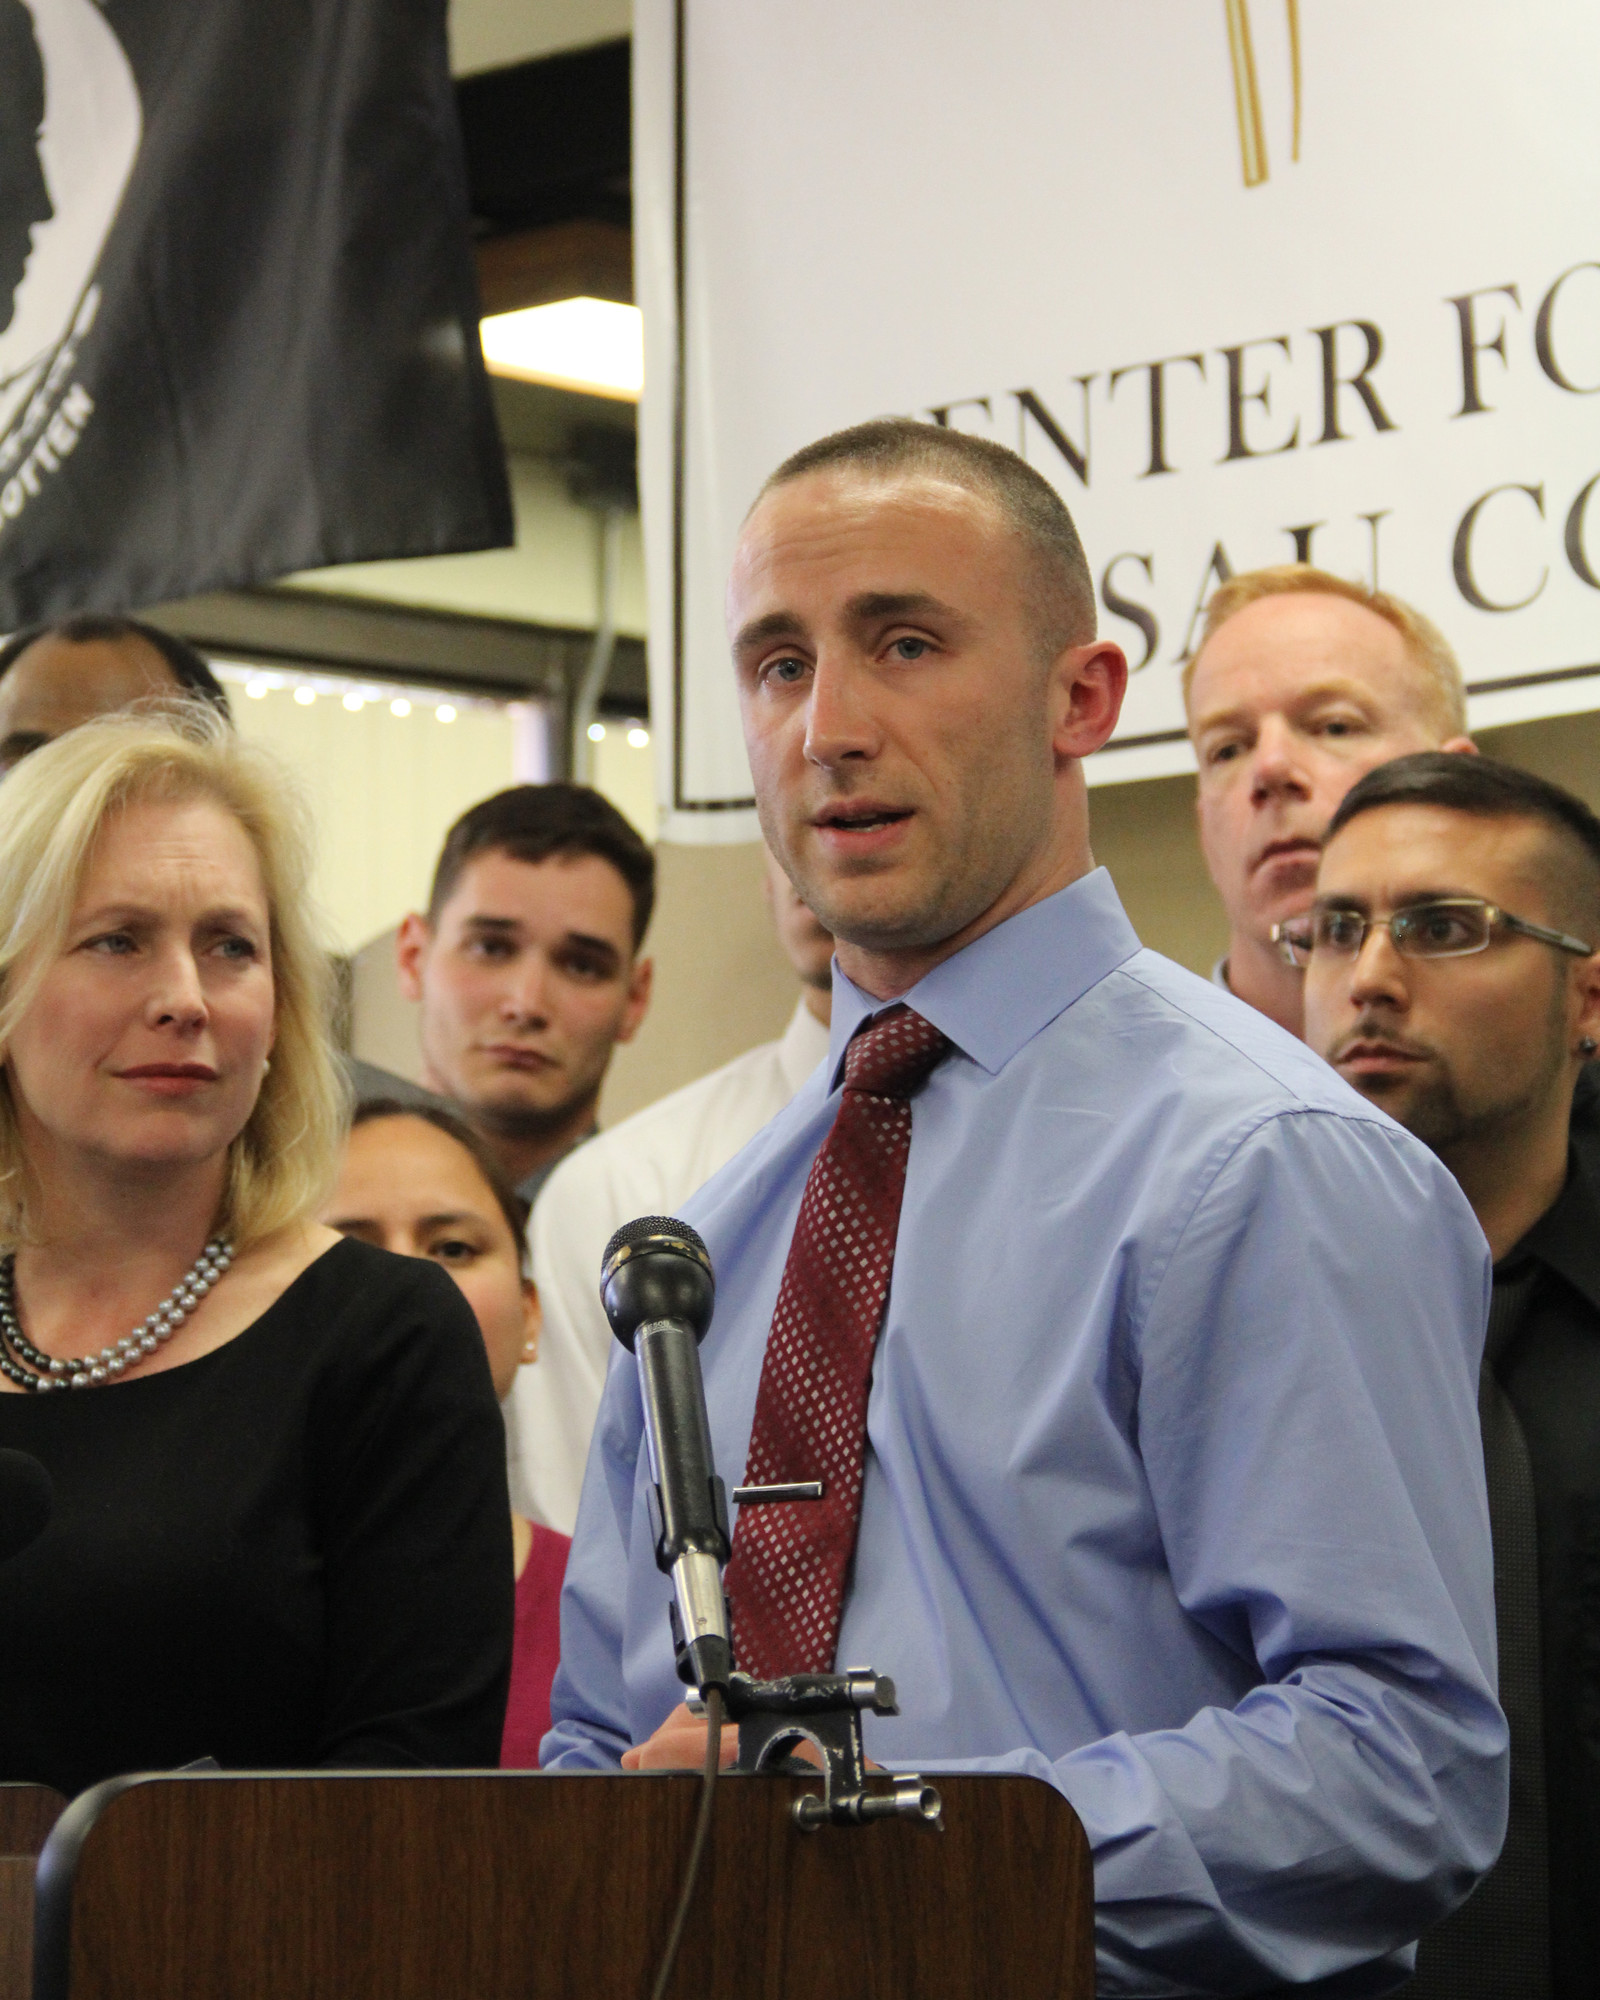 Iraq War veteran Kristofer Goldsmith, 28, detailed his discharge experience at a news conference on April 16, as Sen. Kirsten Gillibrand, left, listened.